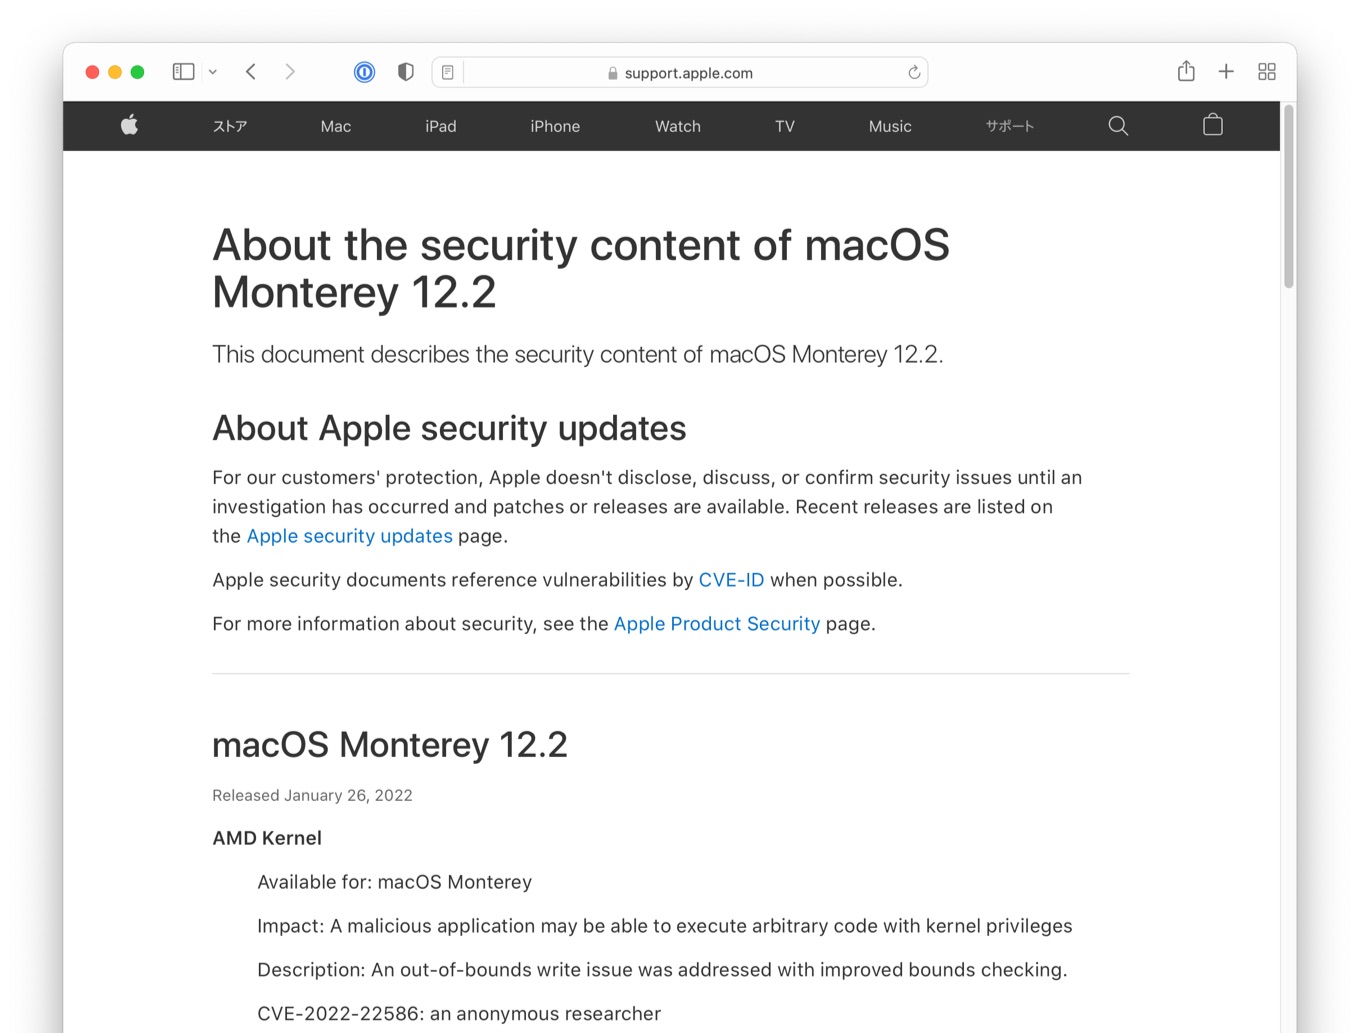 About the security content of macOS Monterey 12.2